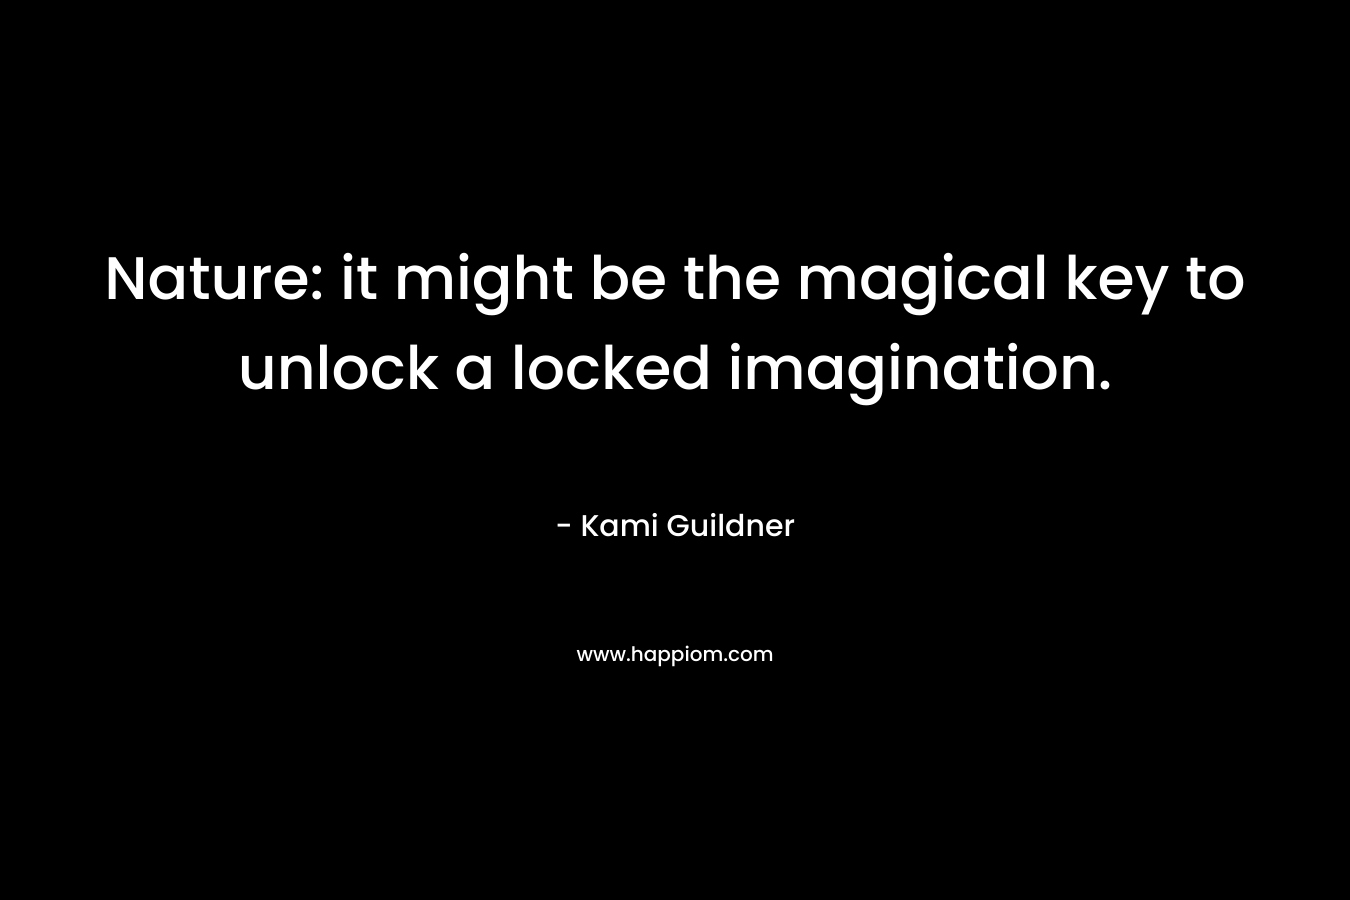 Nature: it might be the magical key to unlock a locked imagination.